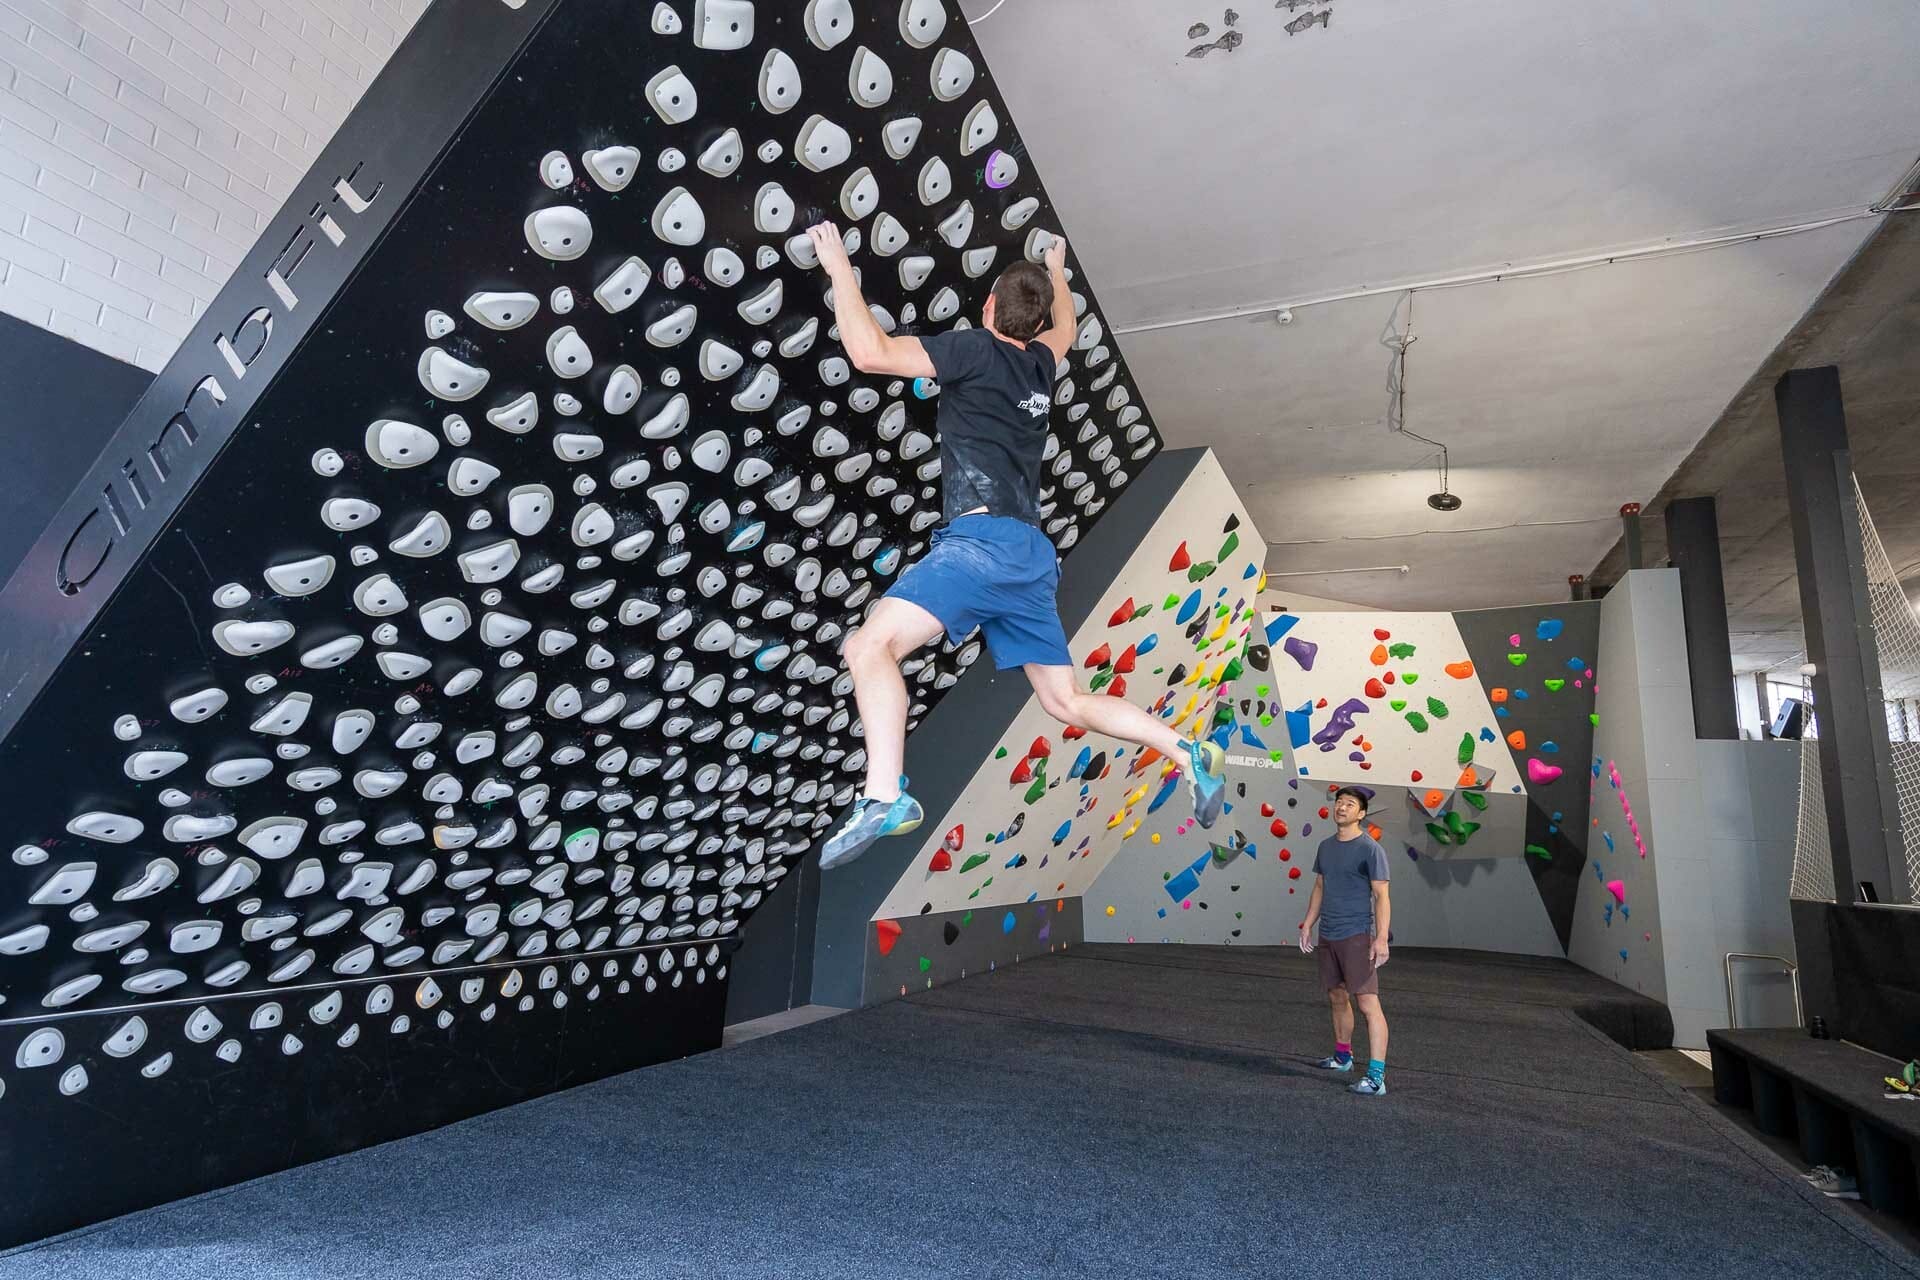 Sydney Has A New Rock Climbing Gym! (After A Two Year Wait), climb fit macquarie, kilter board